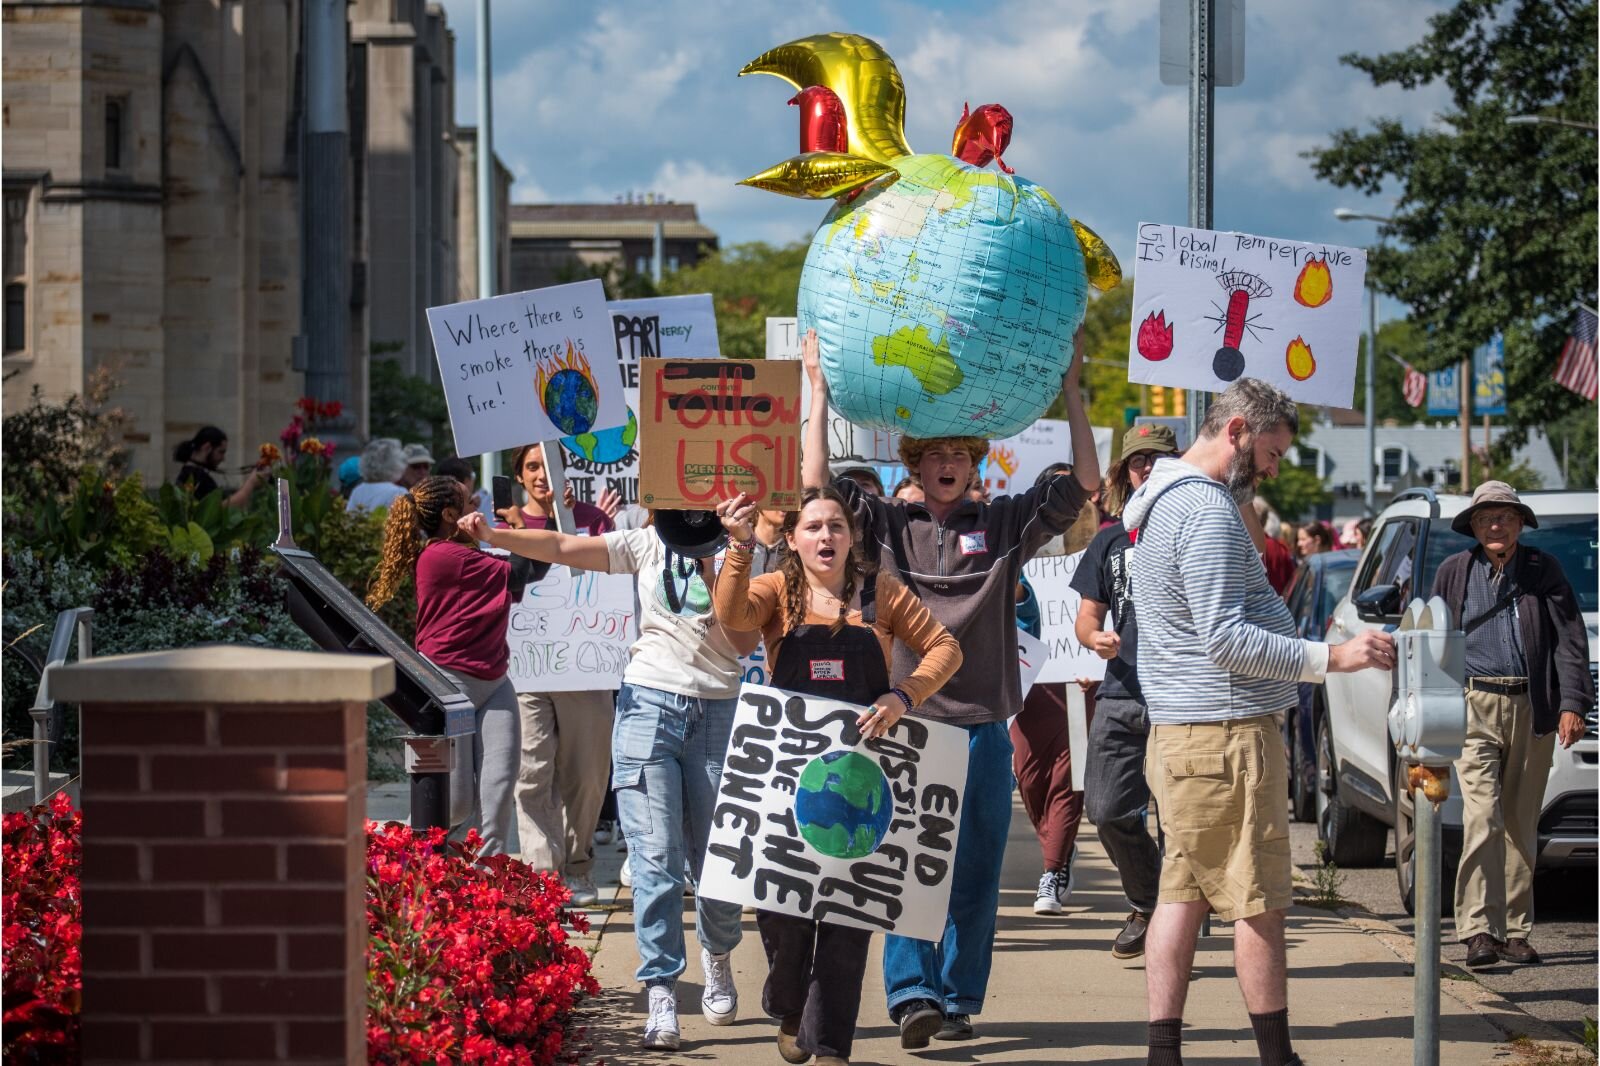 Close to 150 people turned up for the Youth Climate Strike in downtown Kalamazoo.